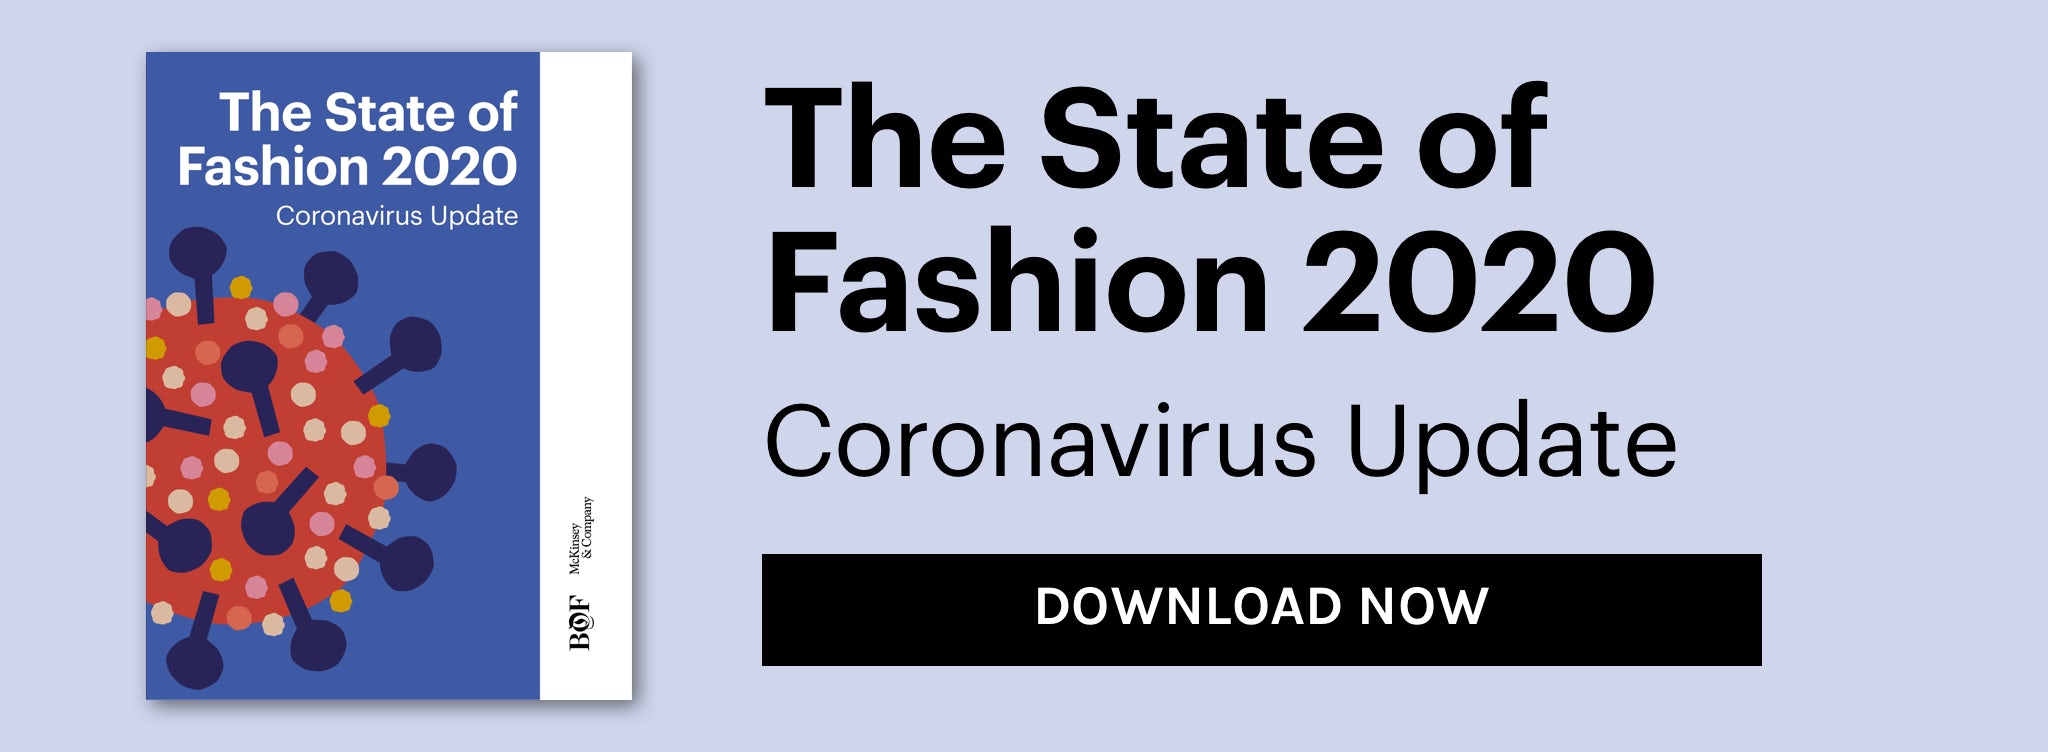 The State of Fashion 2020: Coronavirus Update — It's Time to Rewire the Fashion Industry